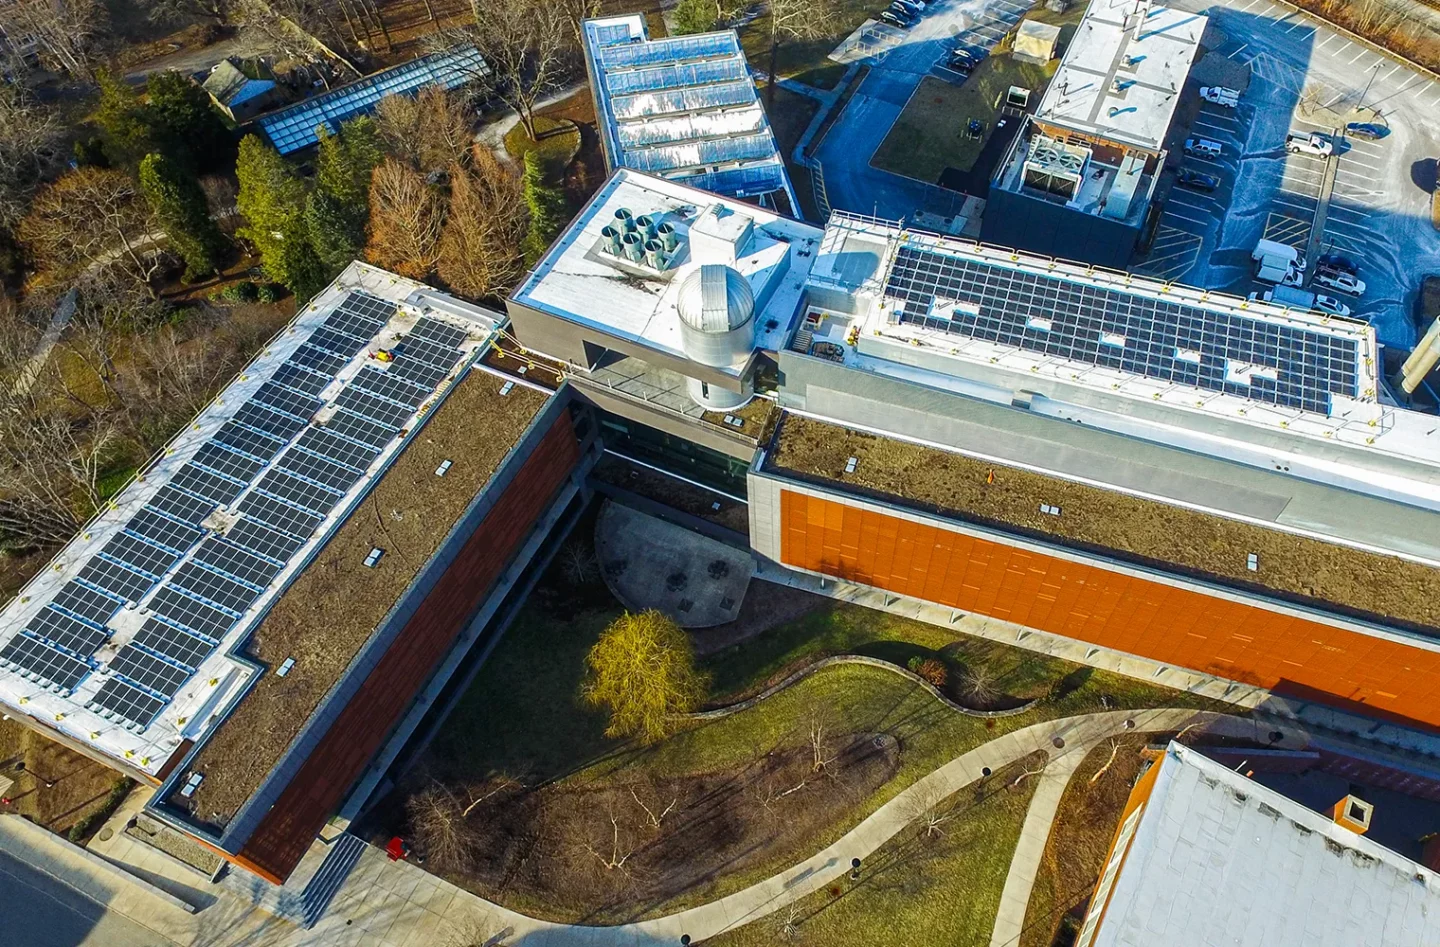 Bridgewater State-Science and Math Center rooftop solar energy